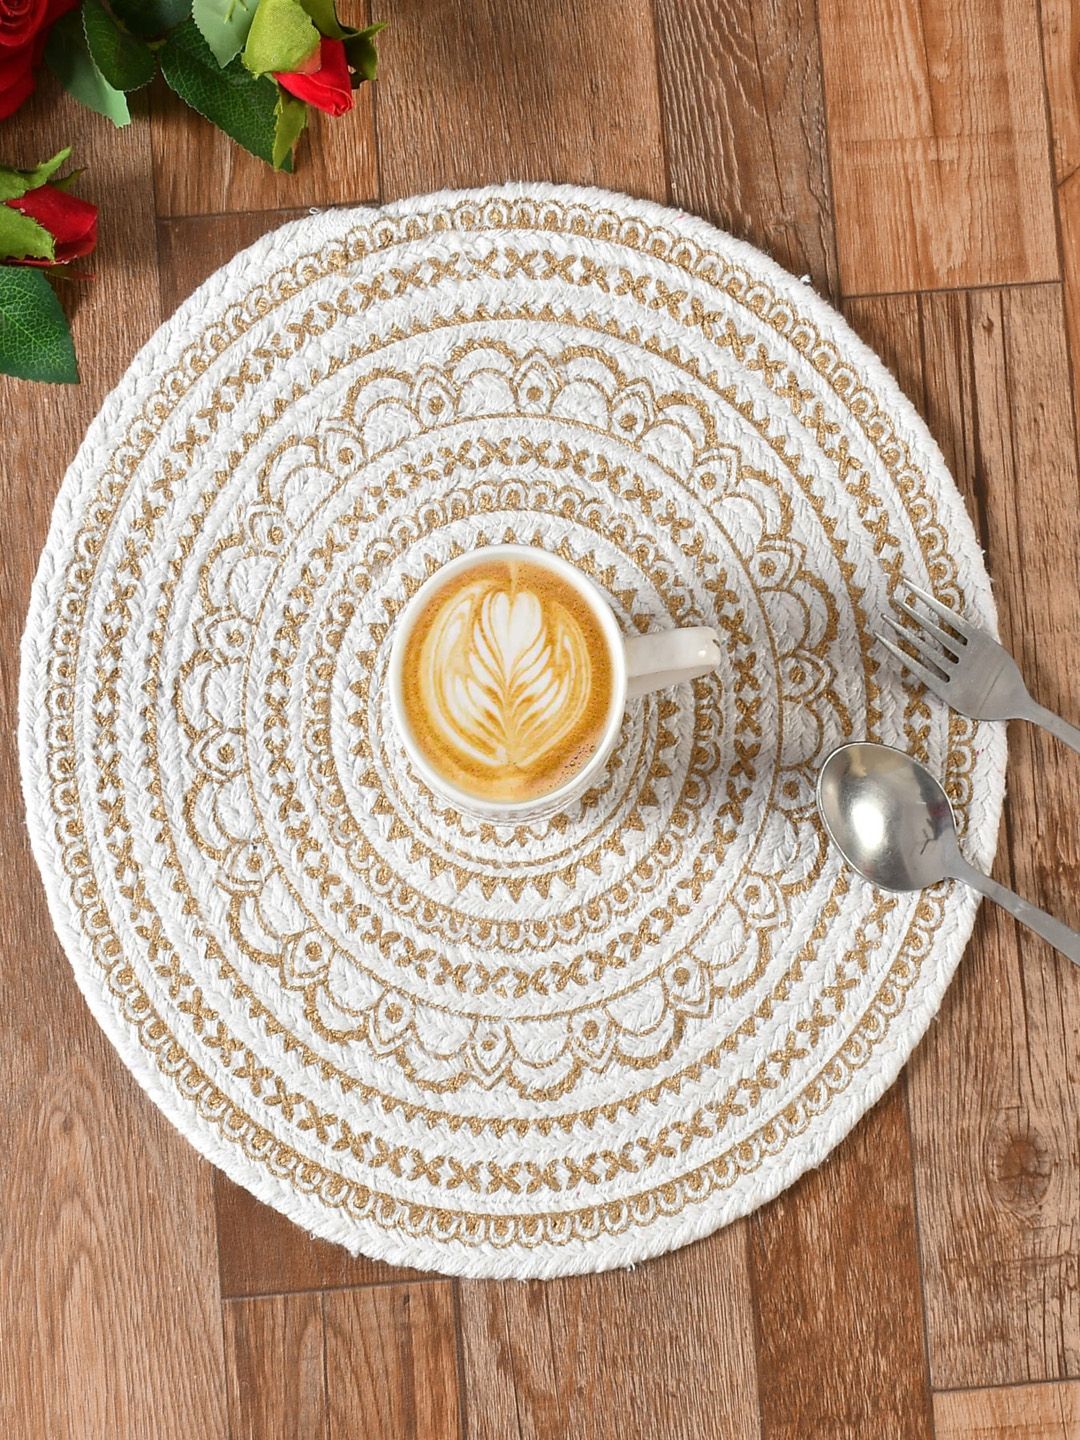 Homefab India Set Of 4 White Gold-Colored Printed Cotton Table Placemats Price in India